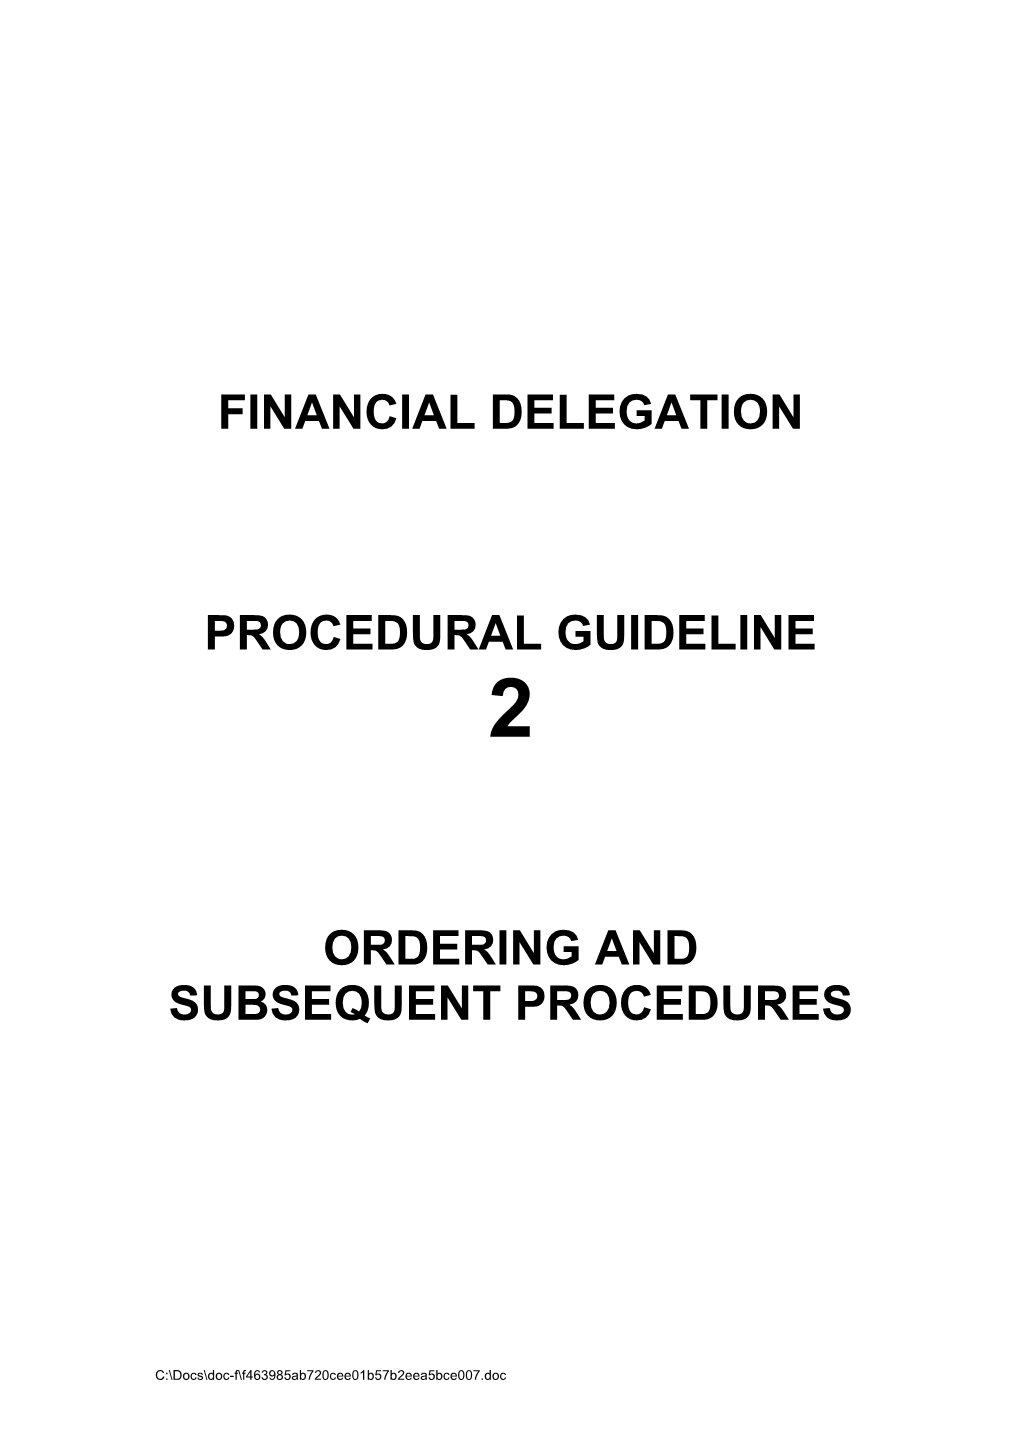 Financial Delegation - Procedural Guideline 2 - Ordering and Subsequent Procedures